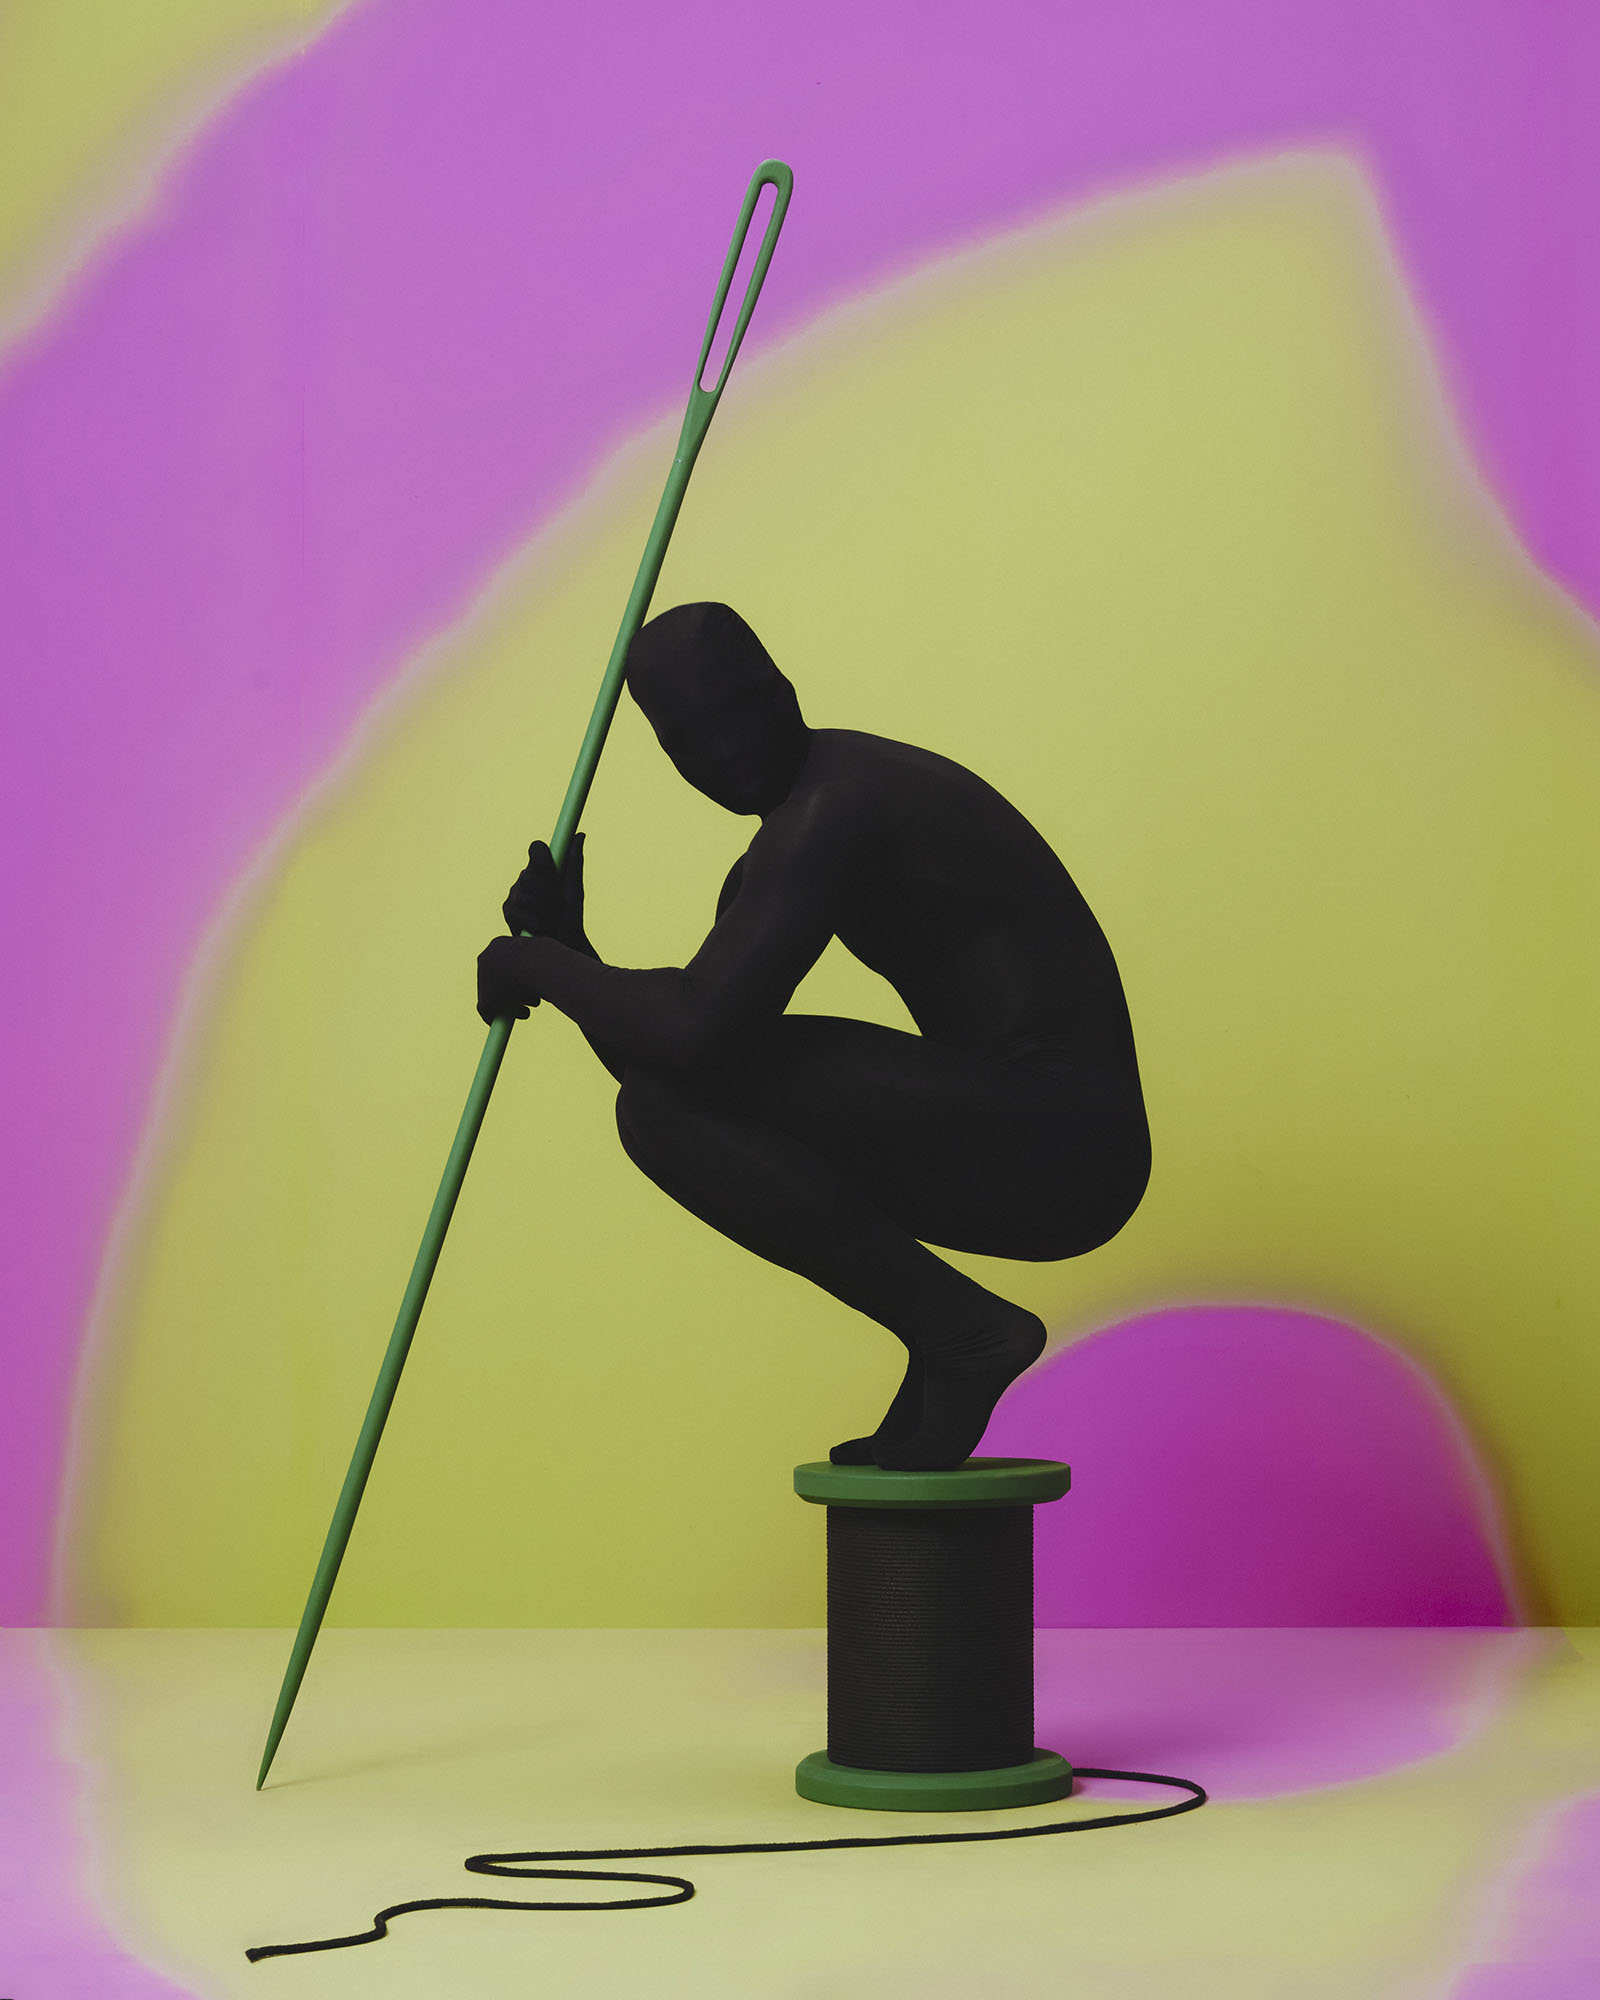 A black silhouette stands on a giant spool, holding an equally large sewing needle.